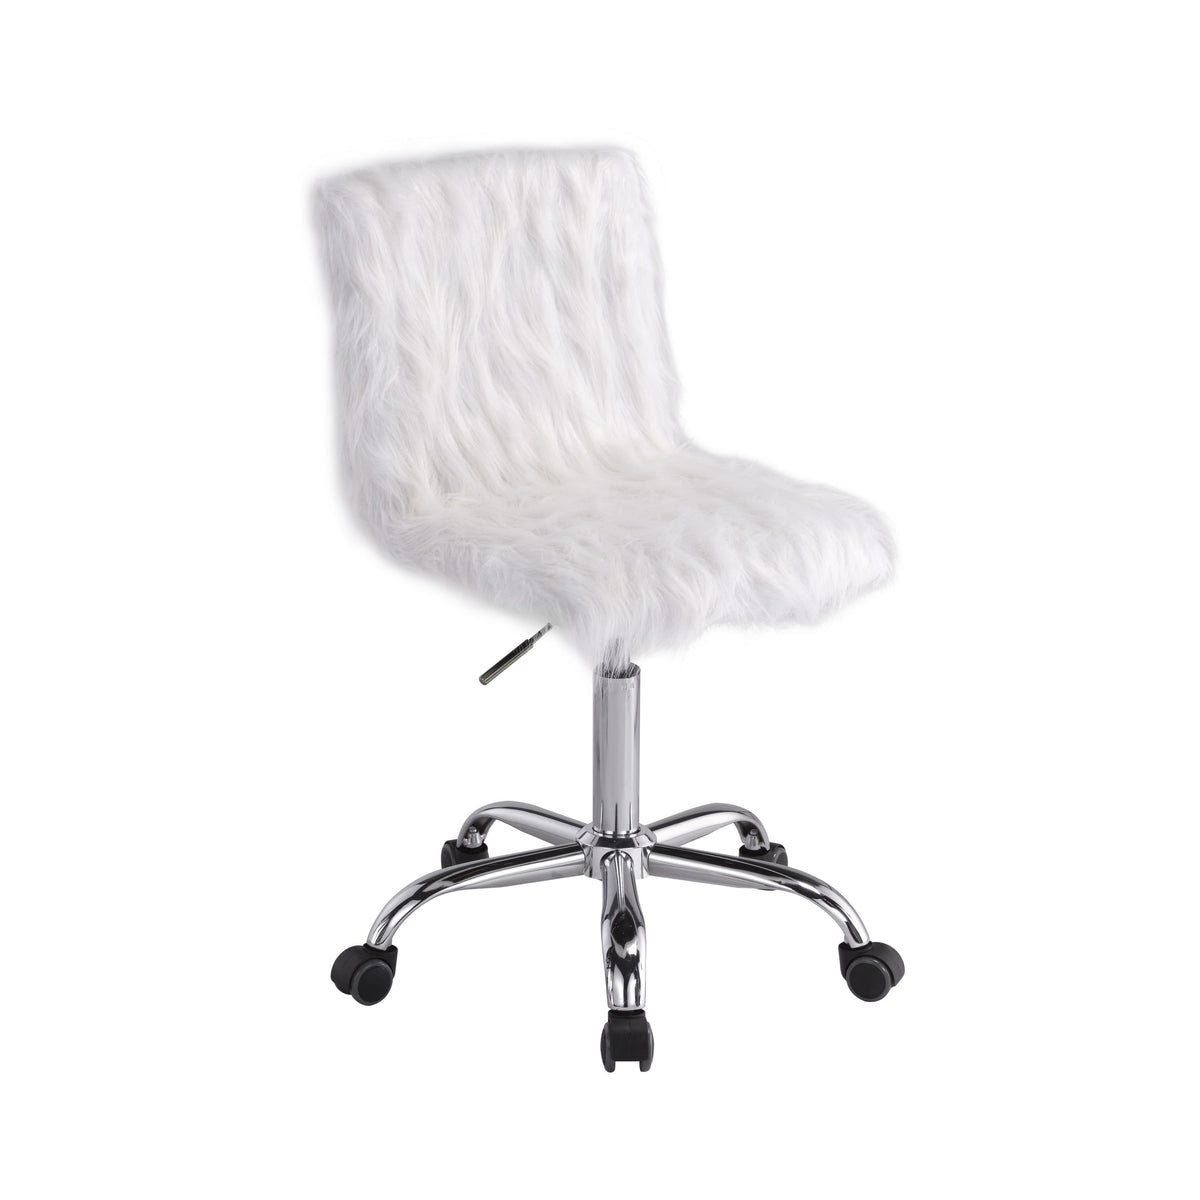 Acme Furniture Arundell OF00120 Office Chair - White